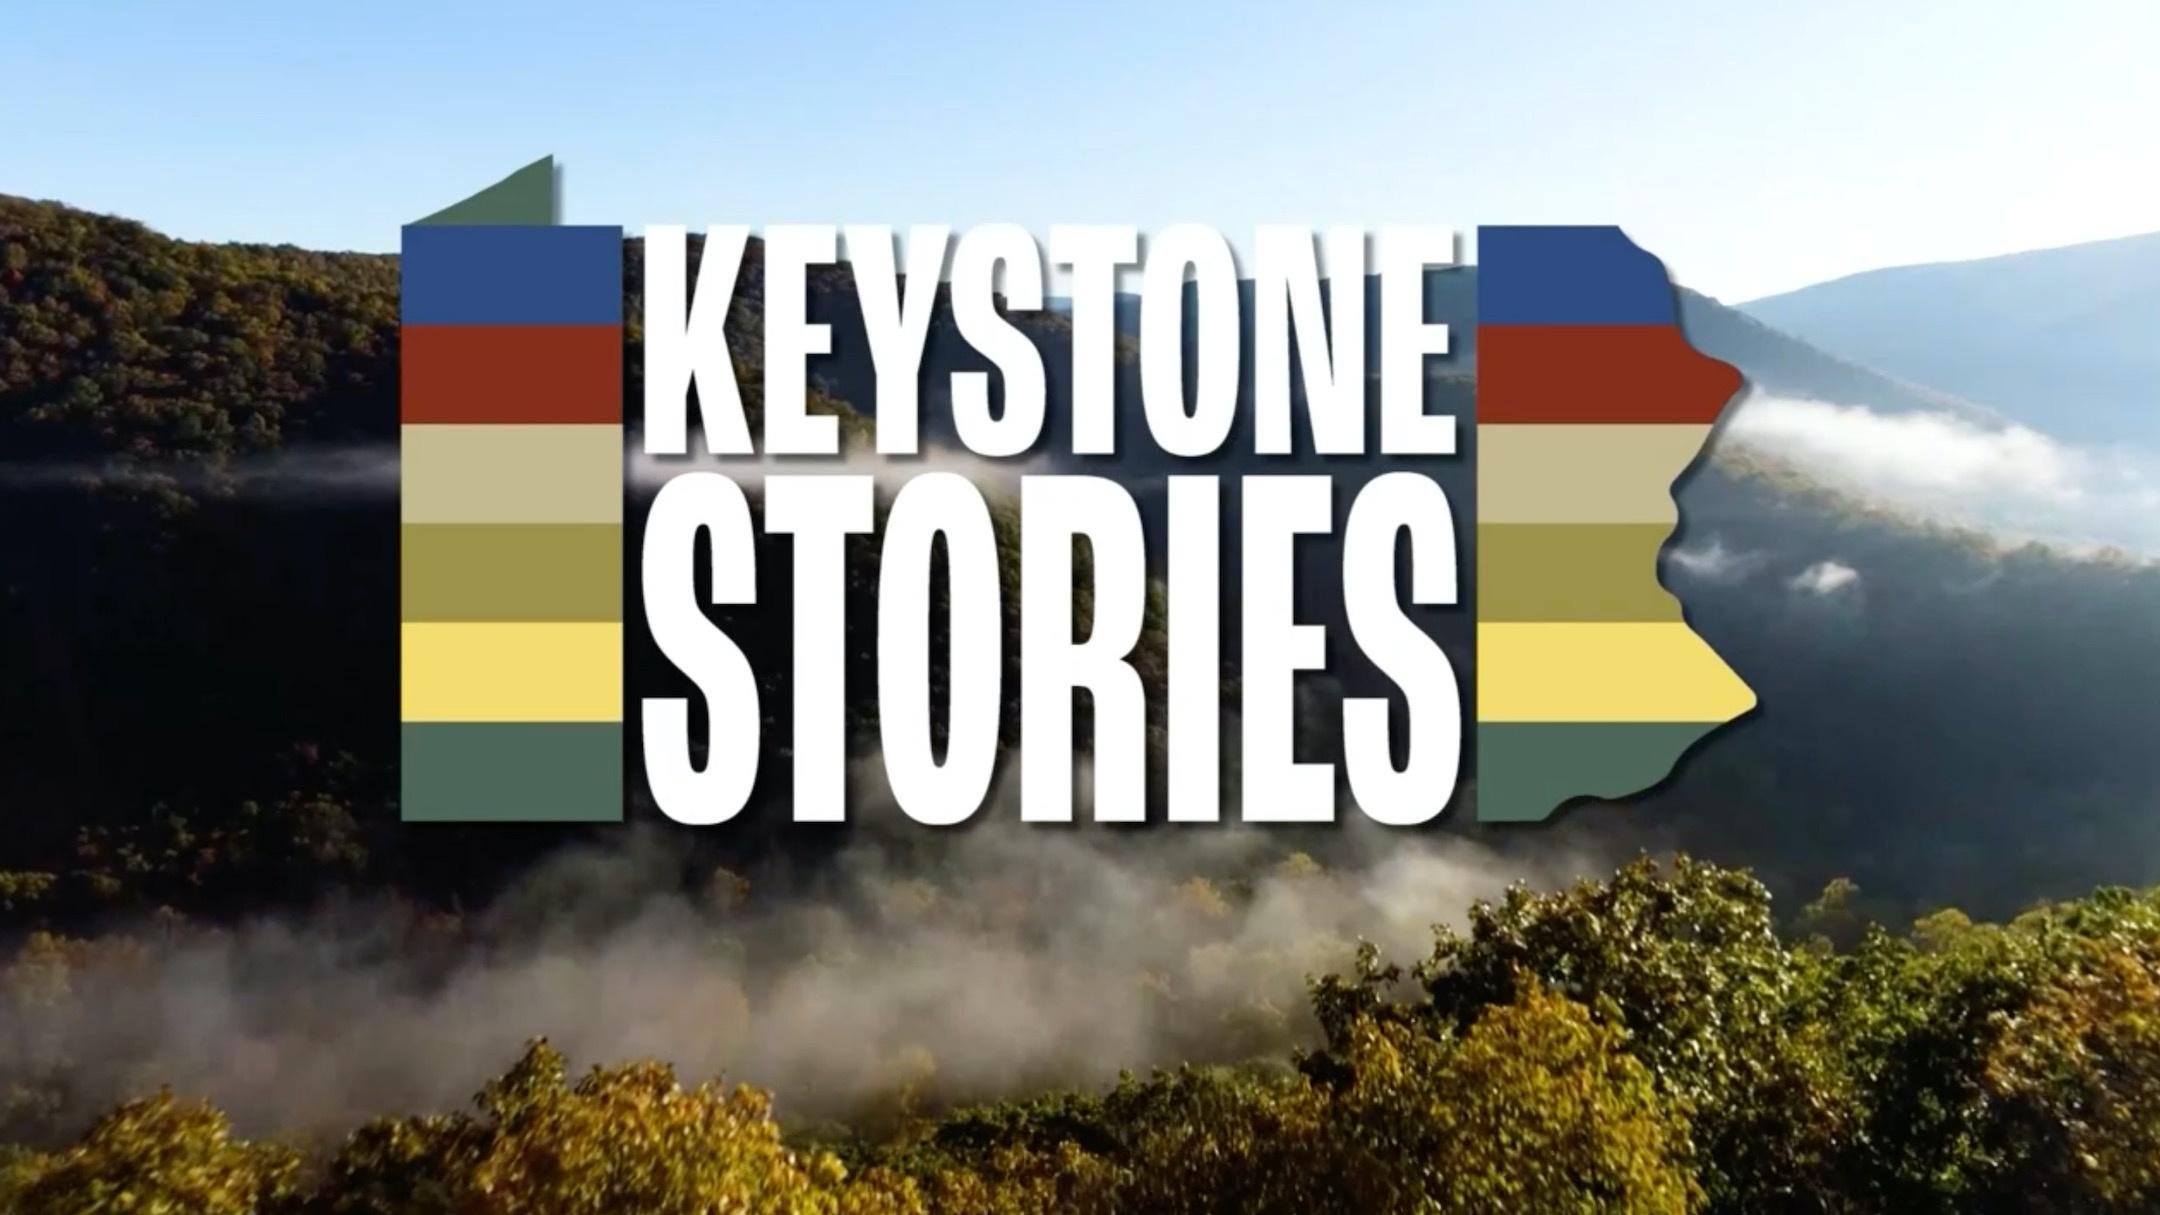 An image of a Pennsylvania forest with a title image that says Keystone Stories in the foreground.